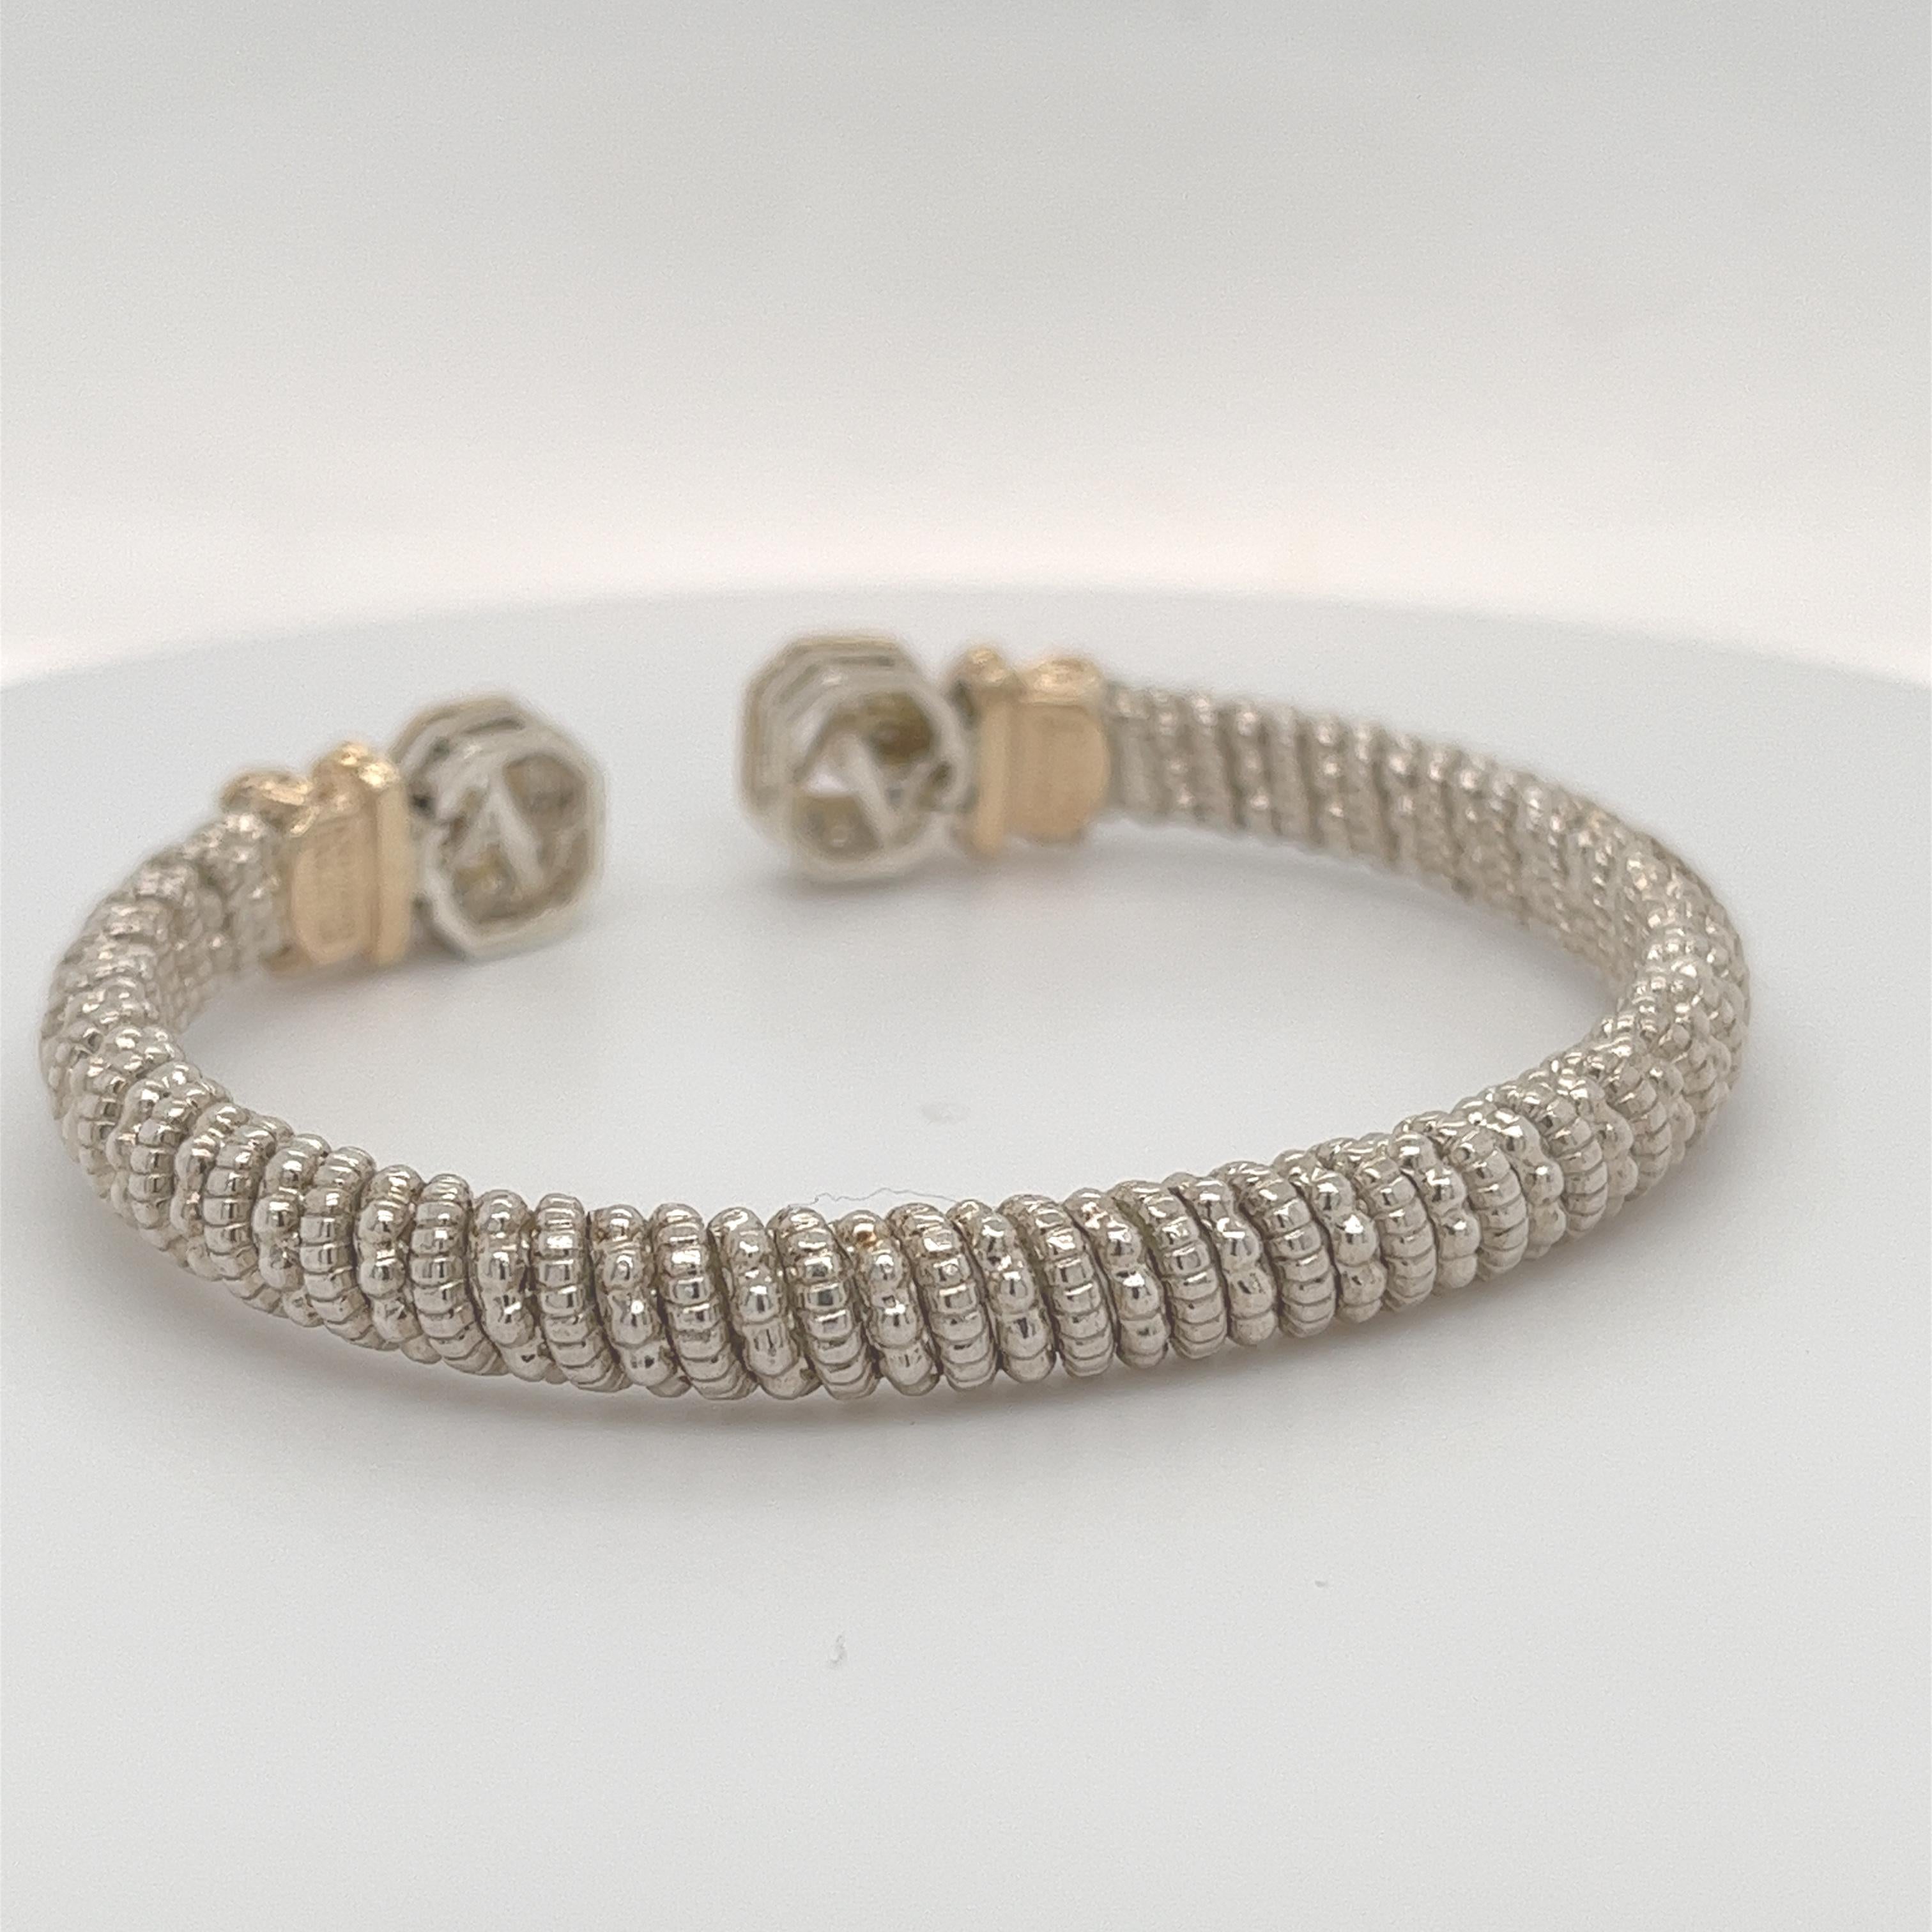 Brilliant Cut Vahan Open Bangle Bracelet with Diamonds in 14K Yellow Gold and Silver For Sale